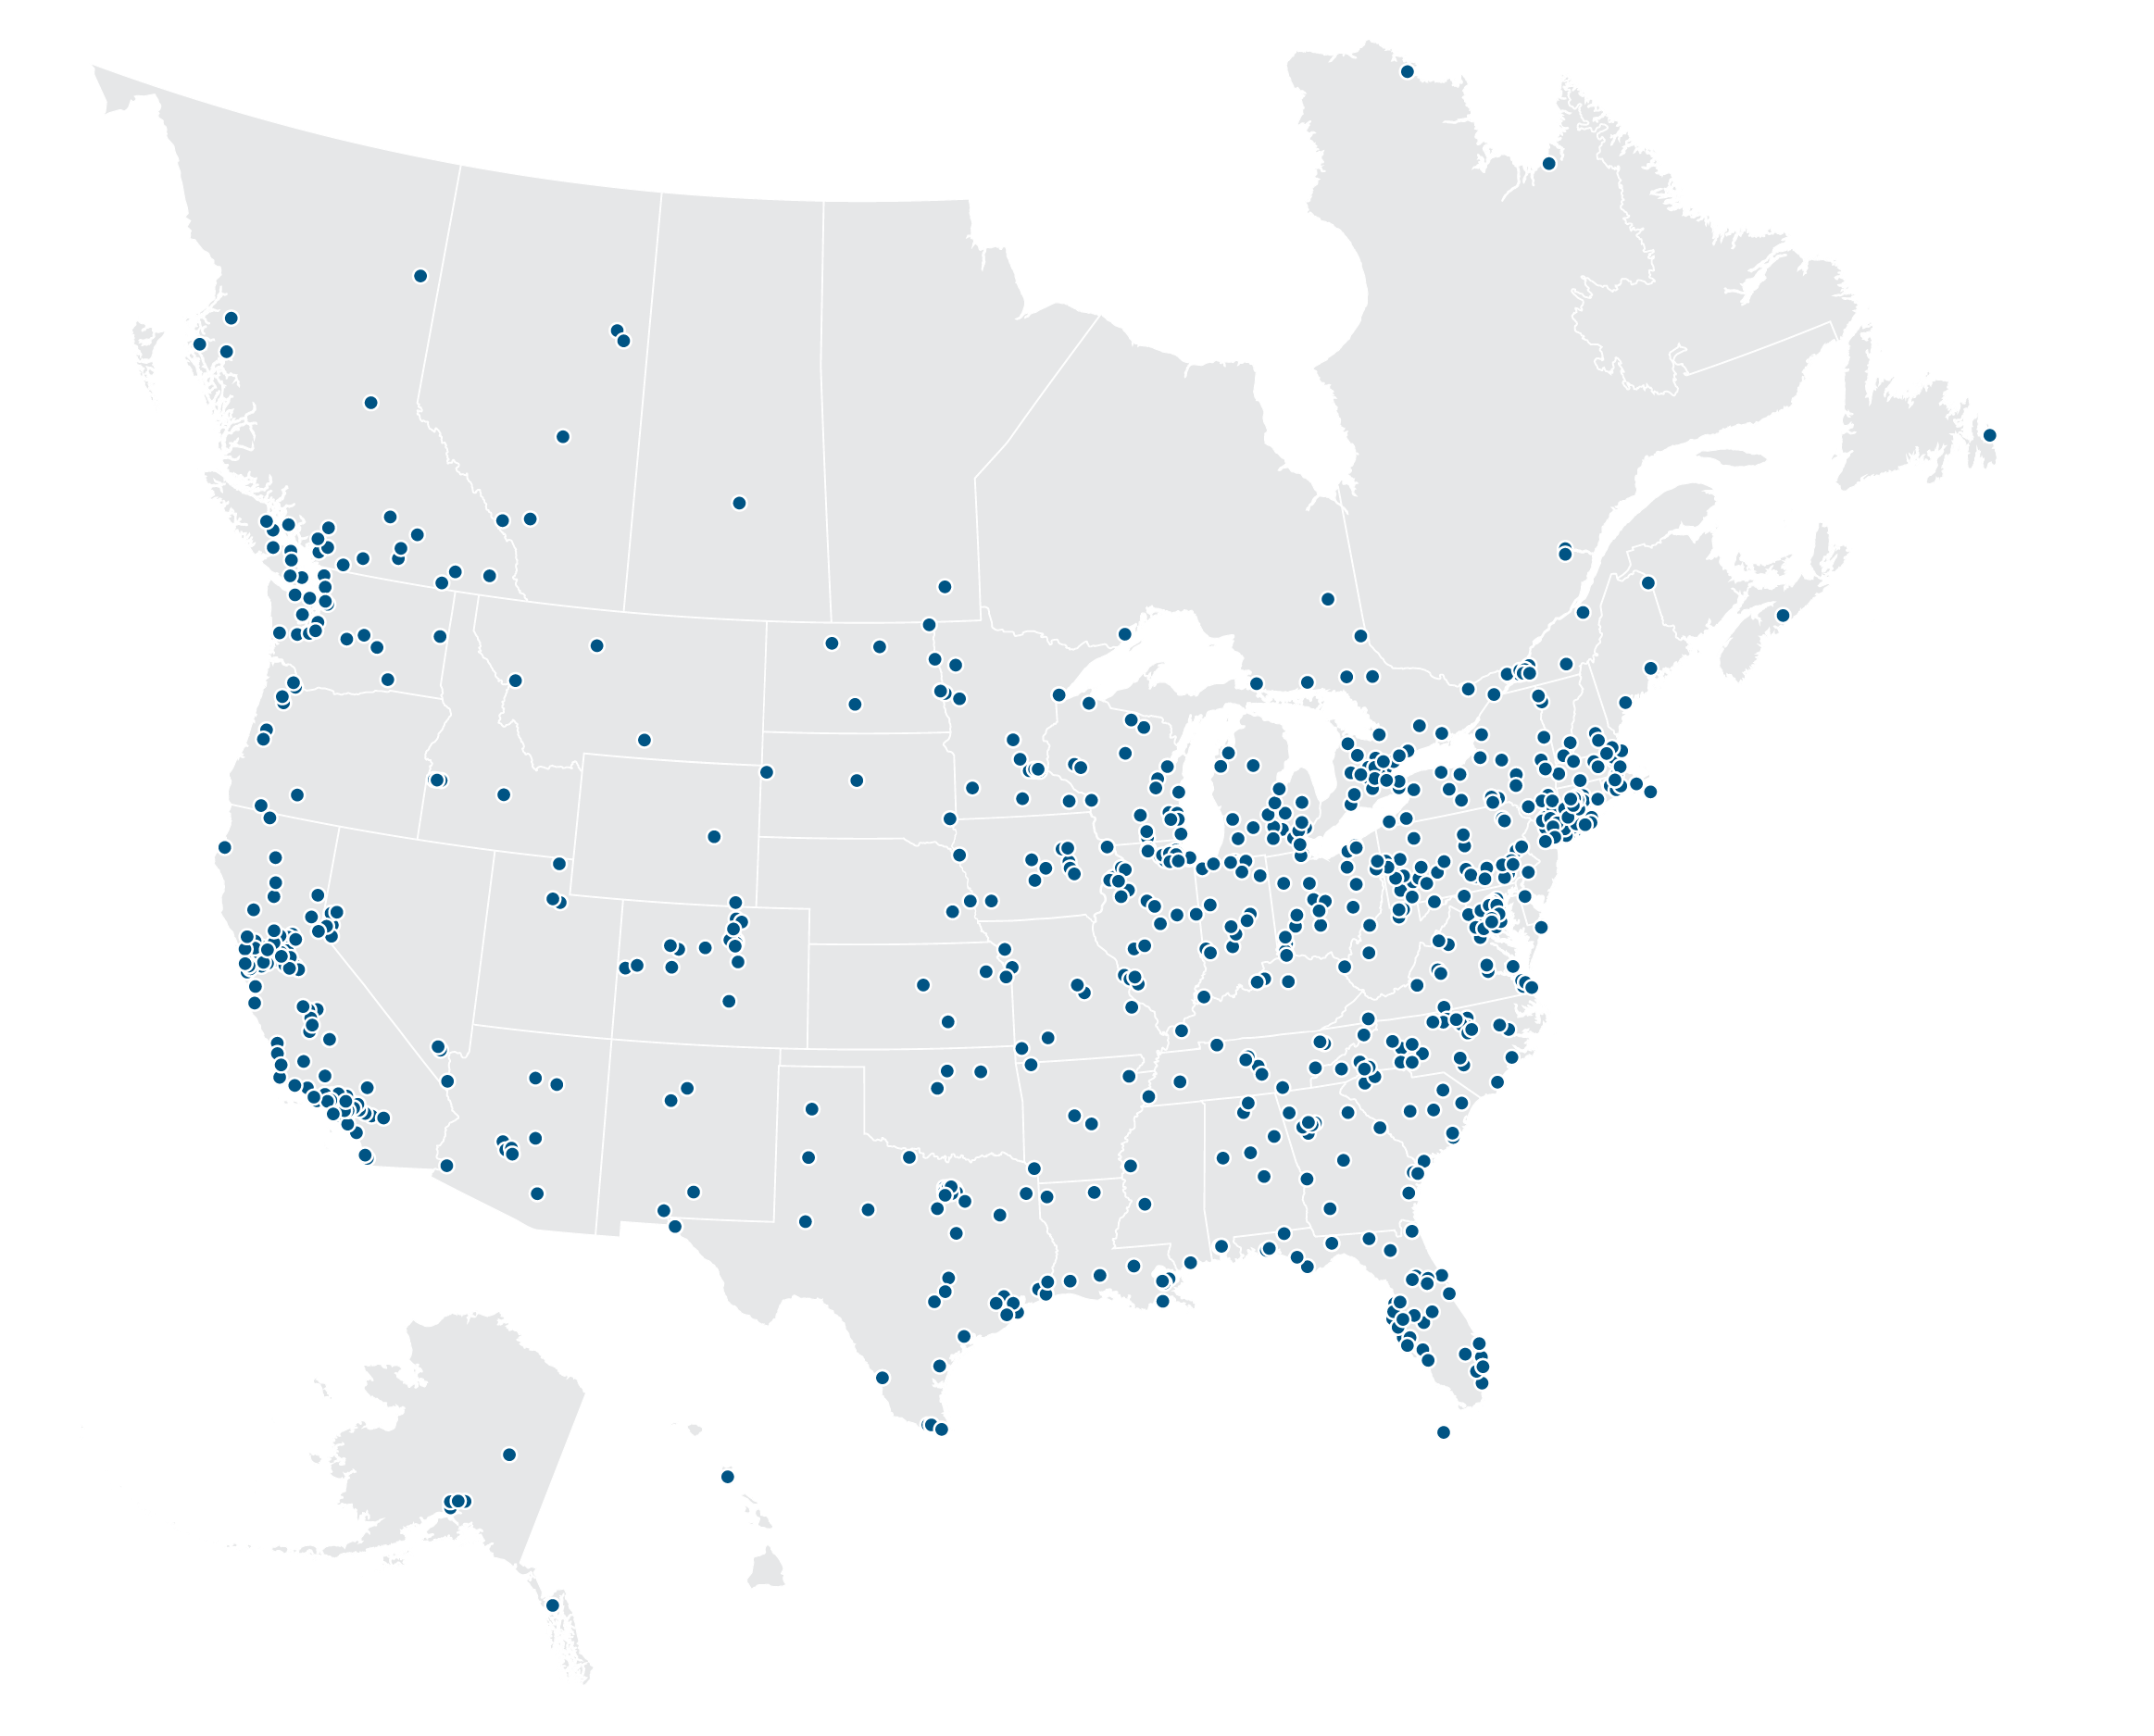 North American map with dots indicating transit agencies that are Genfare customers